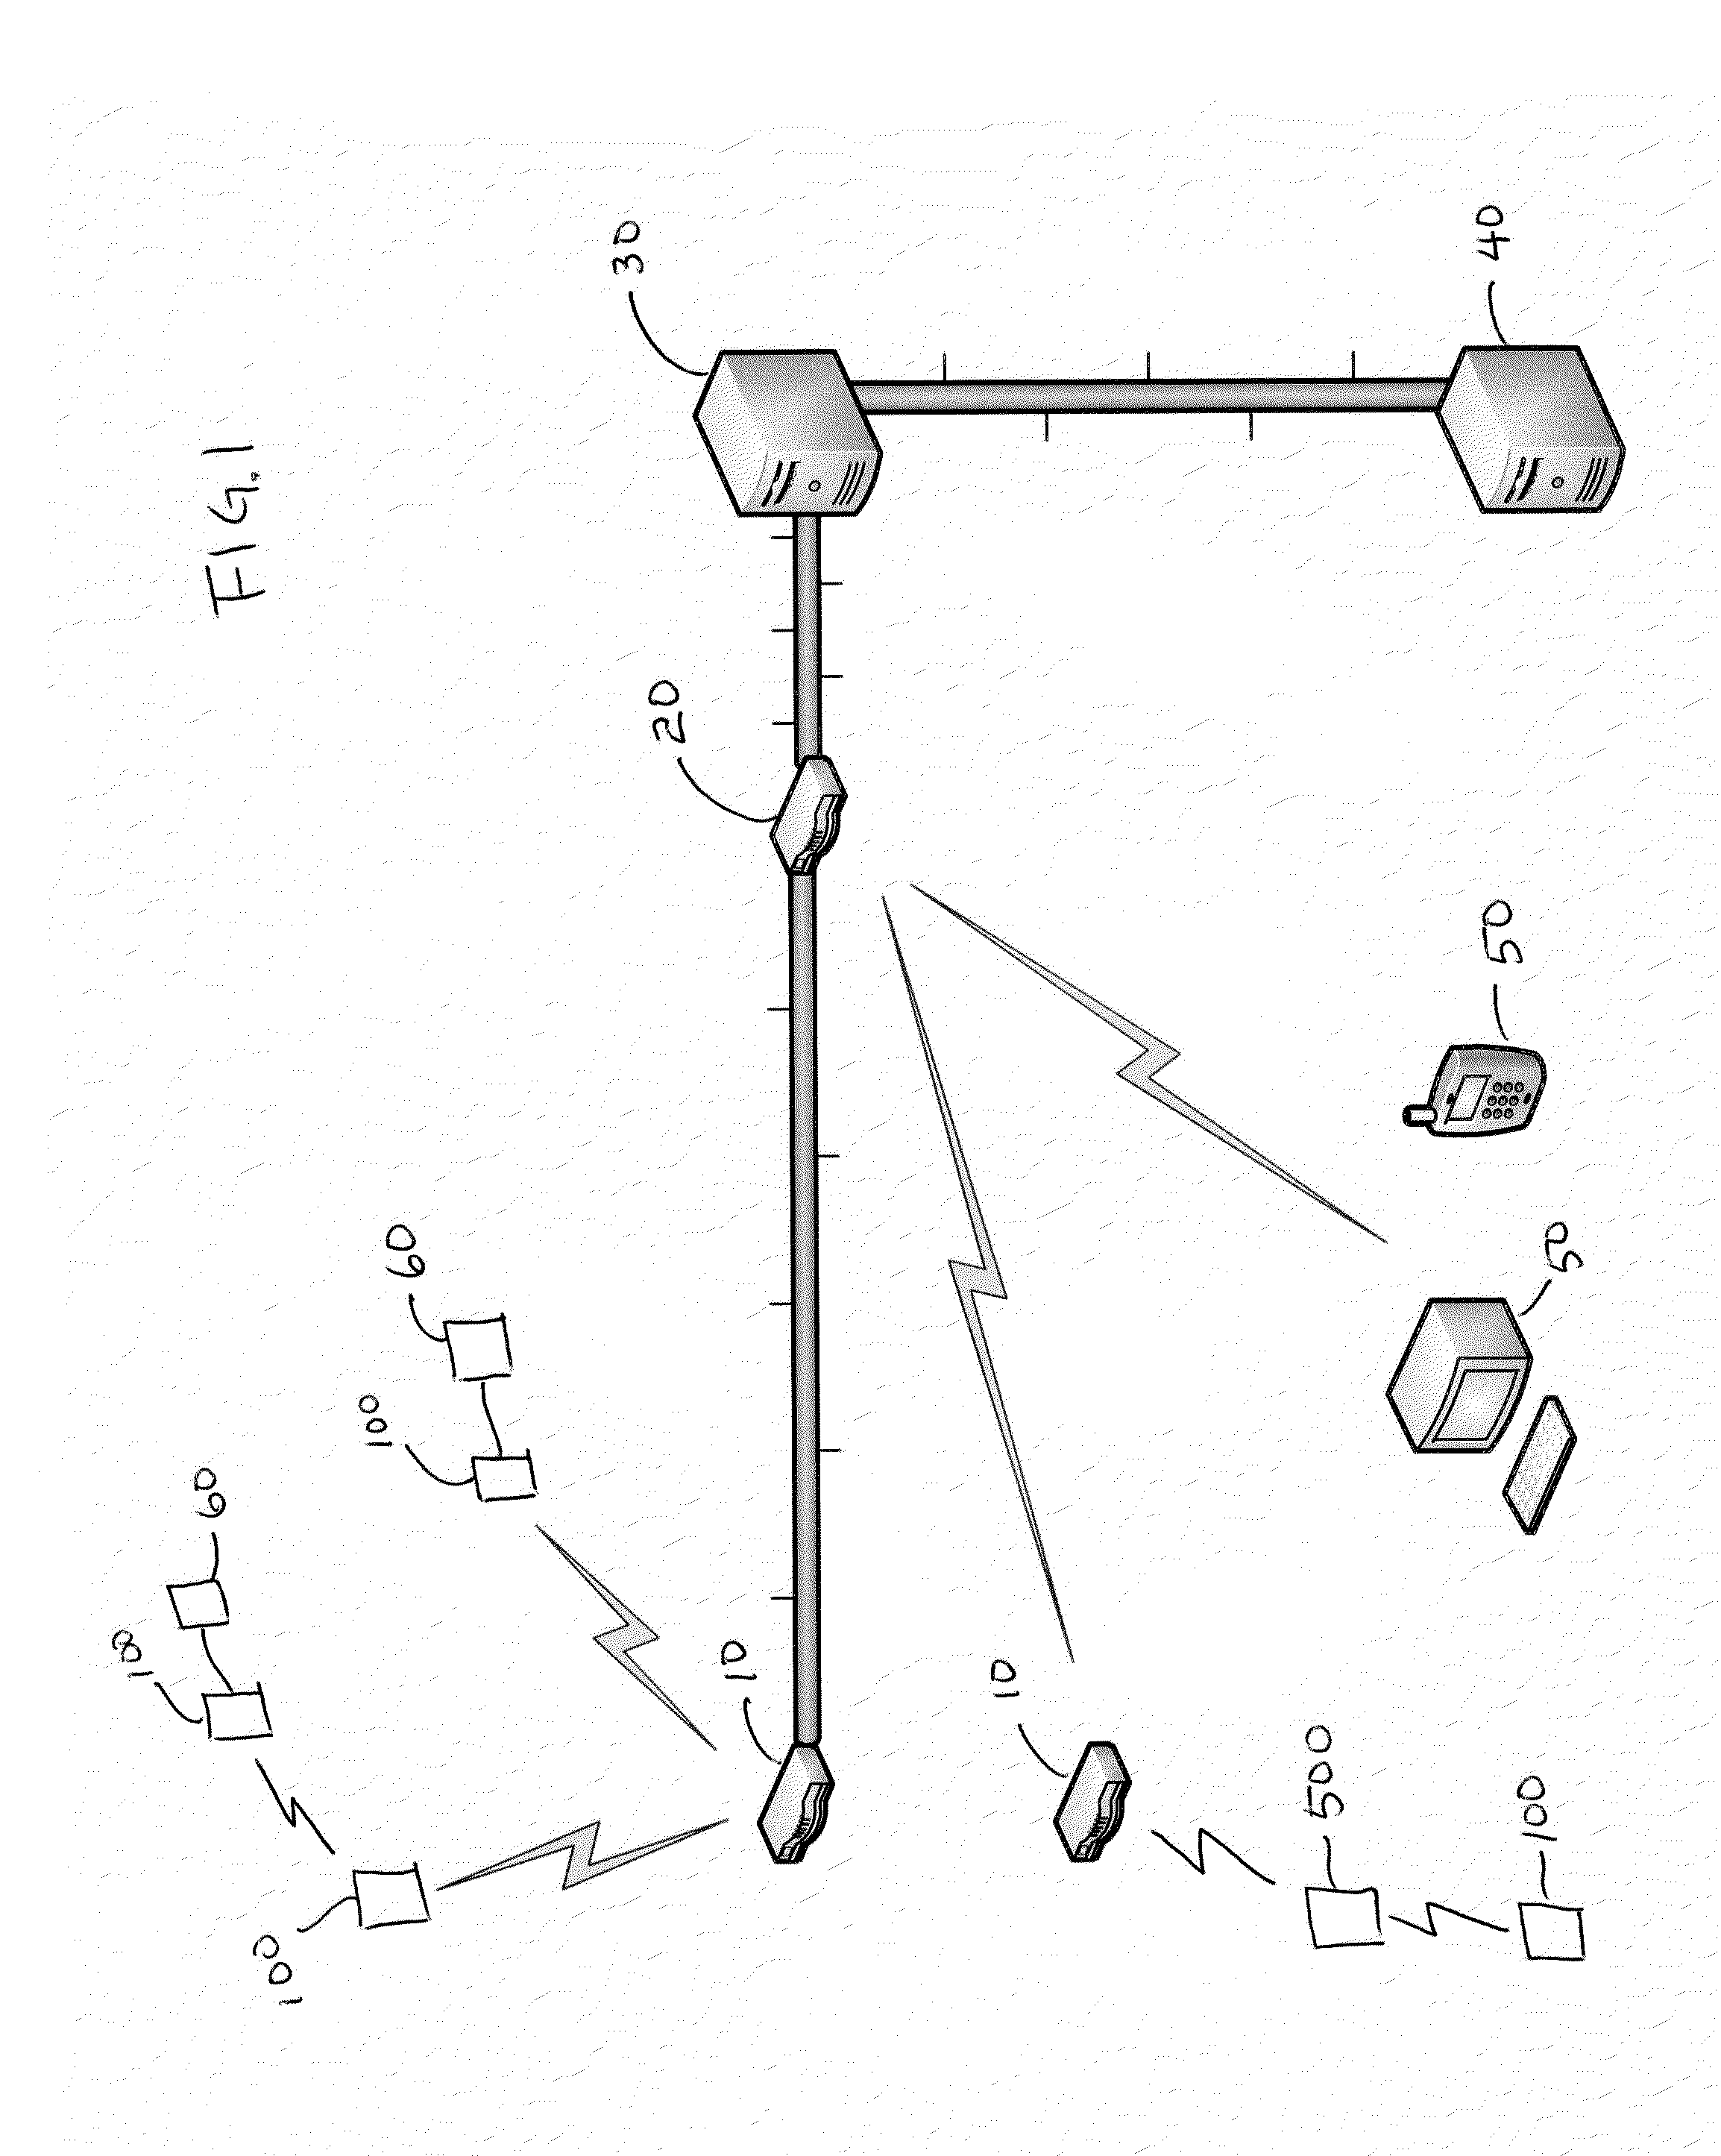 System and apparatus for providing and managing electricity.